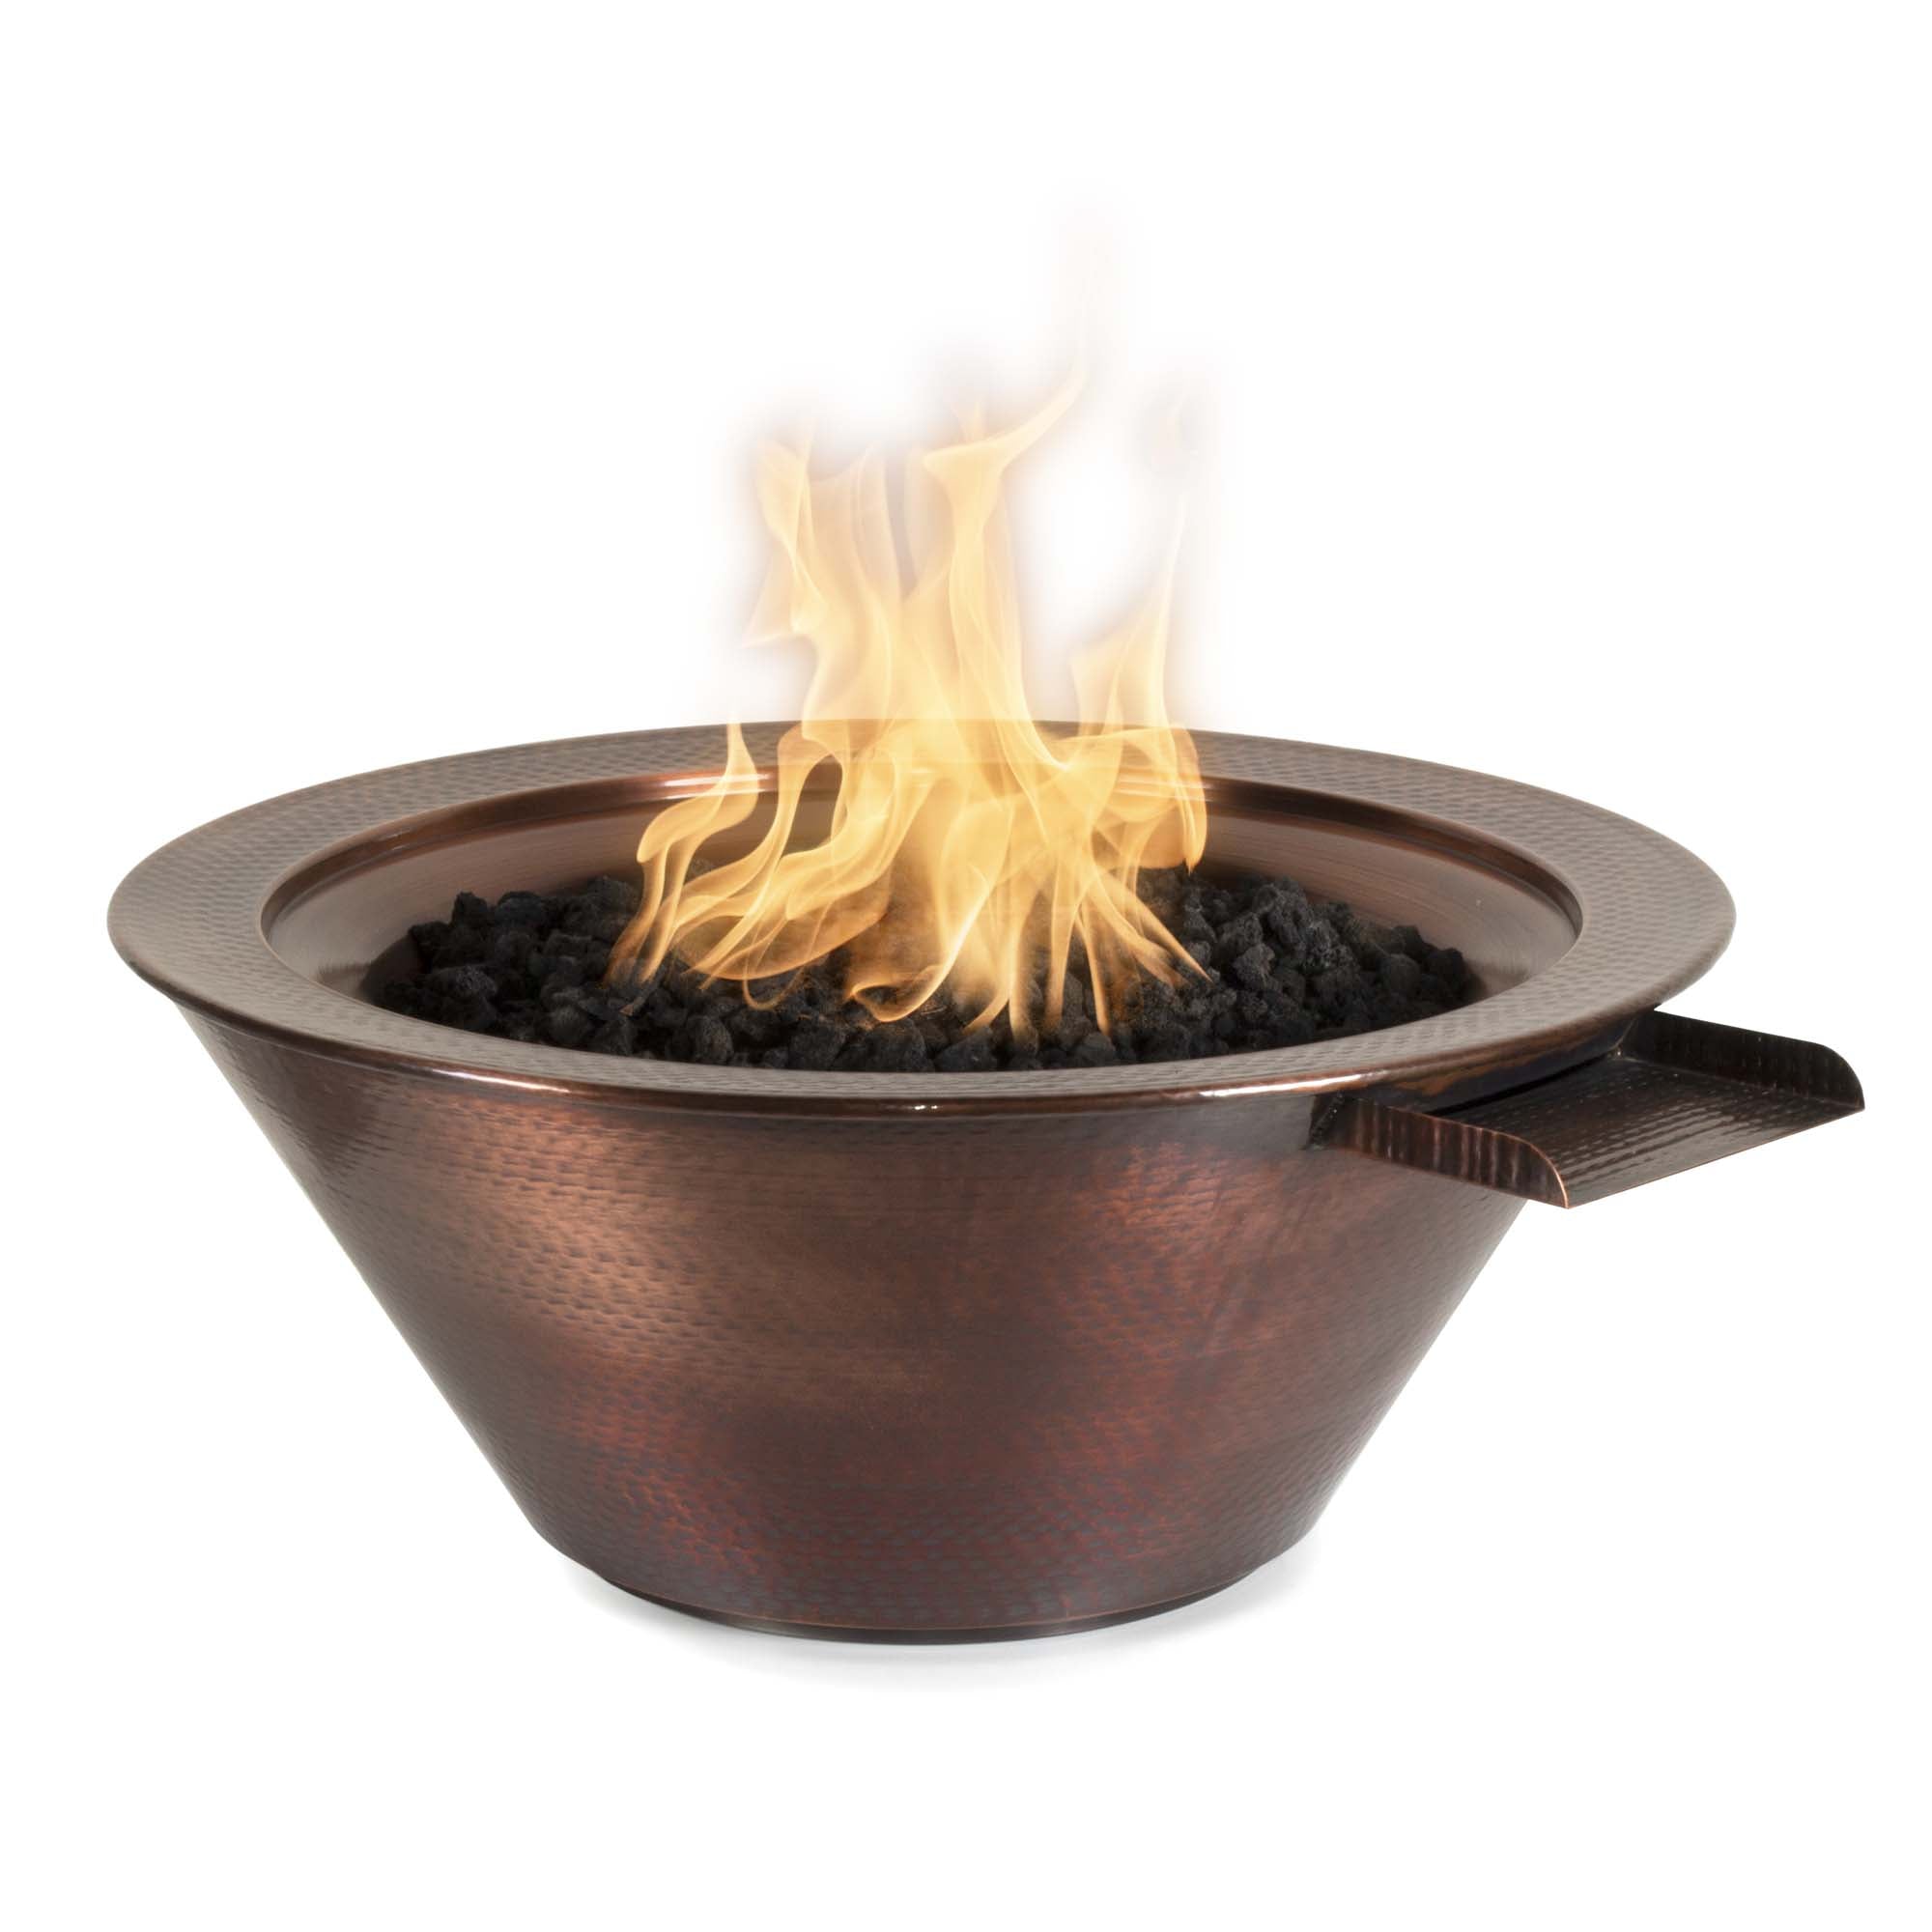 The Outdoor Plus Cazo Fire & Water Bowl Hammered Copper OPT-101-XXNWCB - Serenity Provision